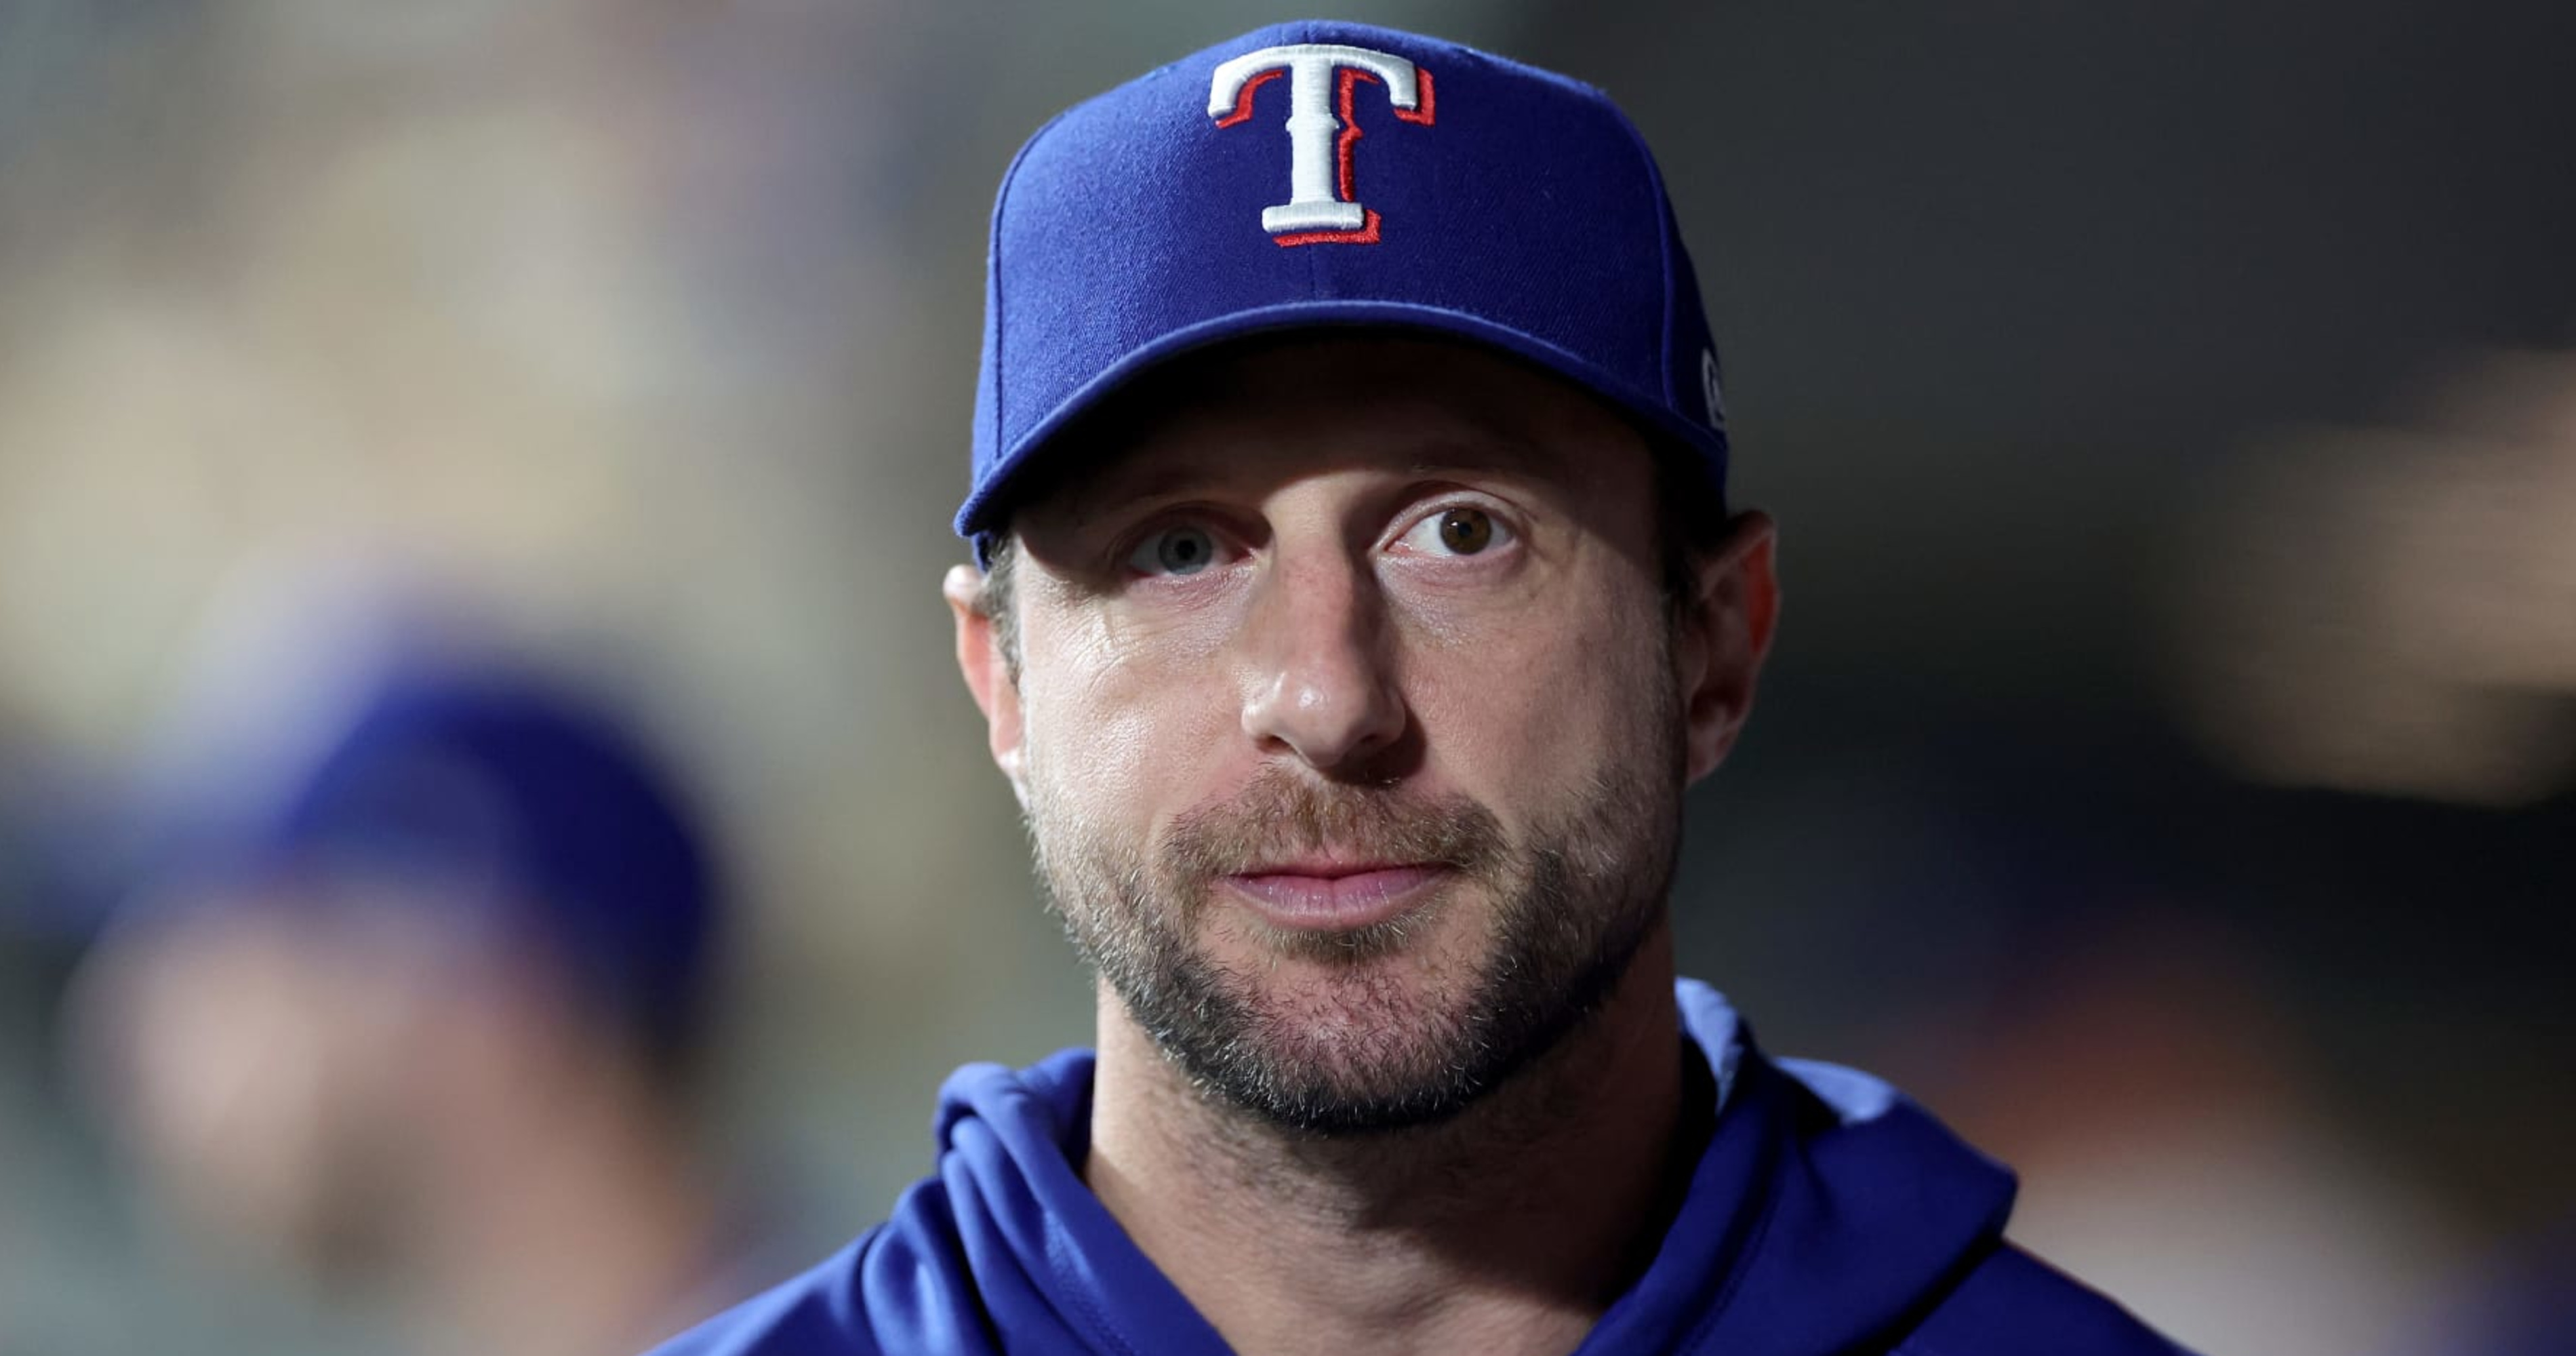 Rangers' Max Scherzer Faces Batters, Hoping for Playoff Return